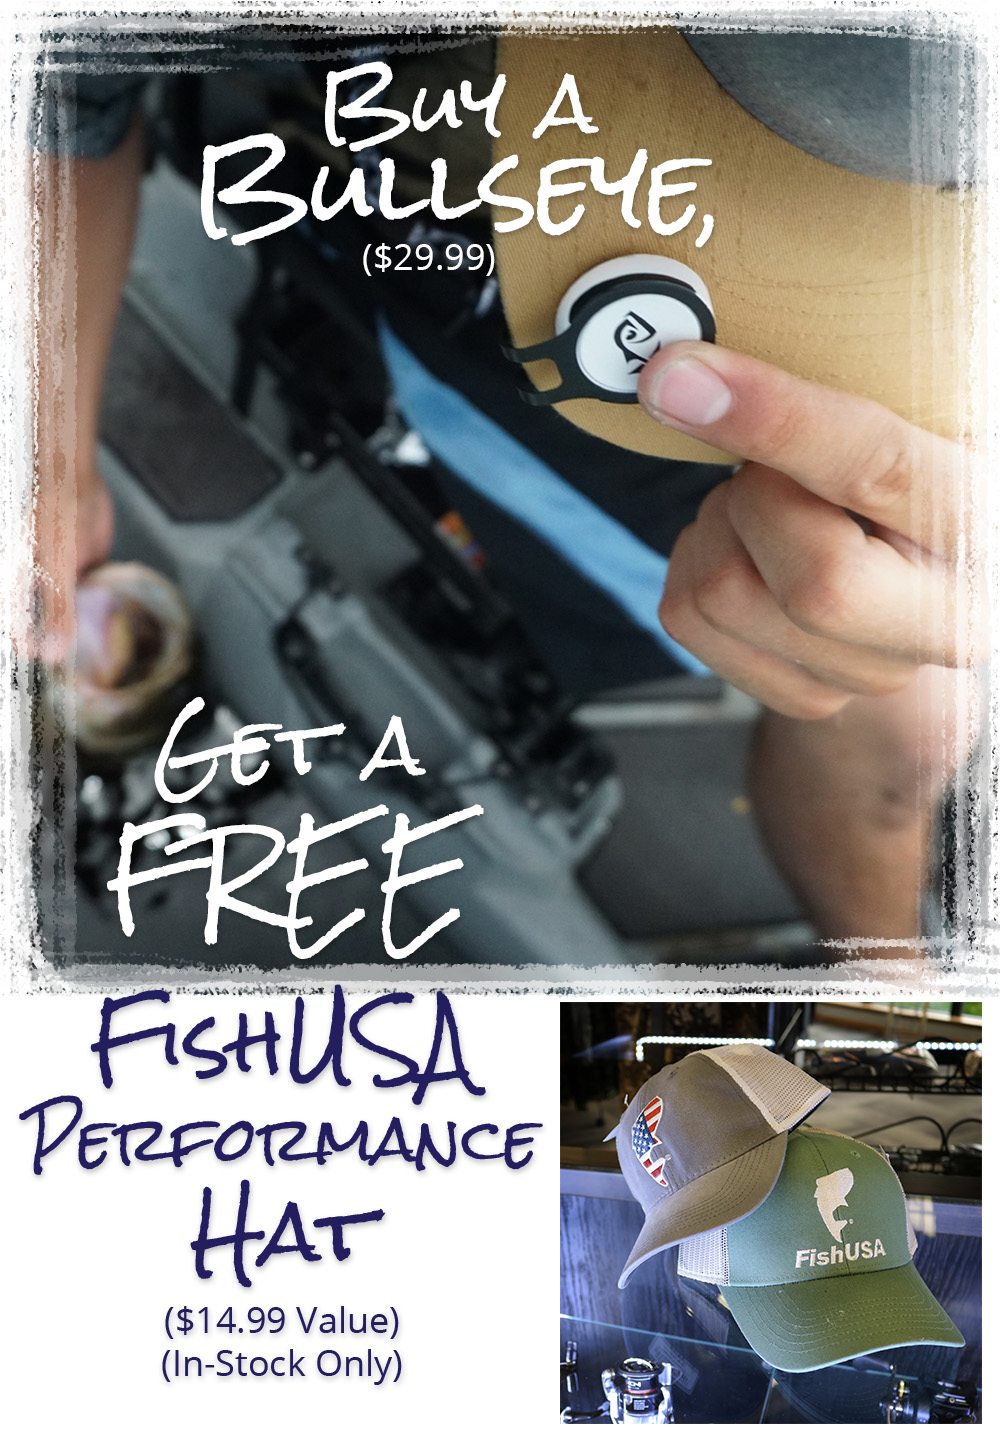 Get a FREE FishUSA Performance Hat with today's ANGLR Bullseye Fishing Tracker purchase!